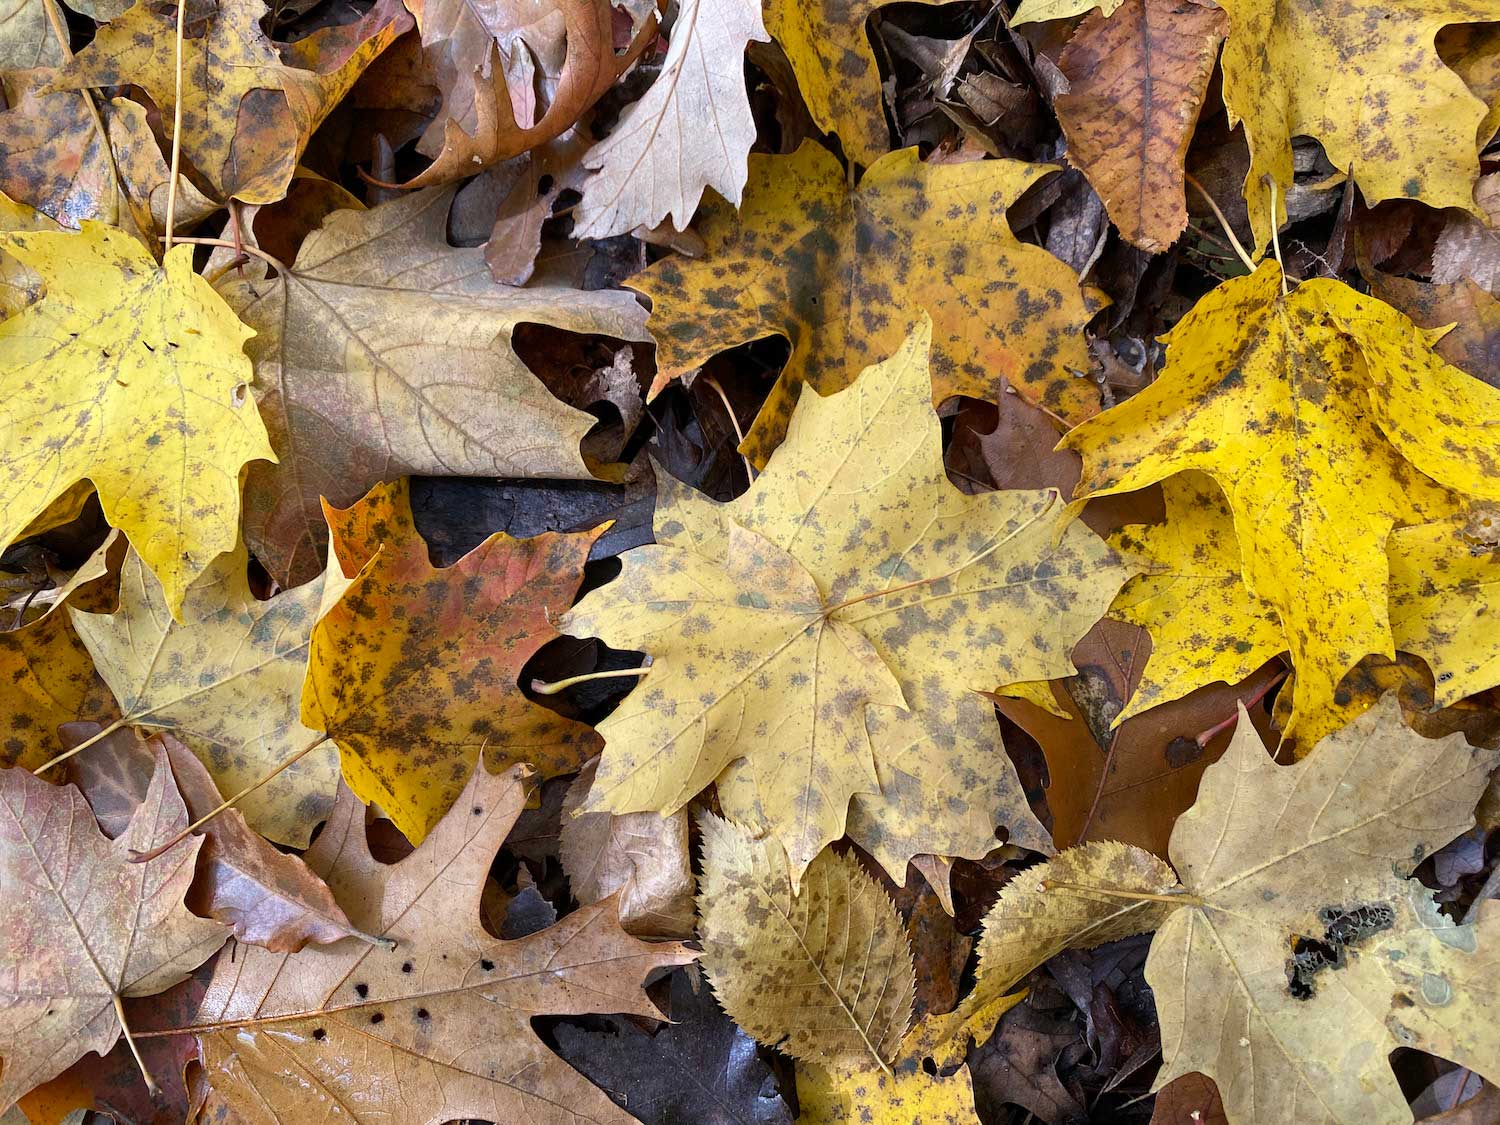 A collection of yellow and brown leaves on the ground.